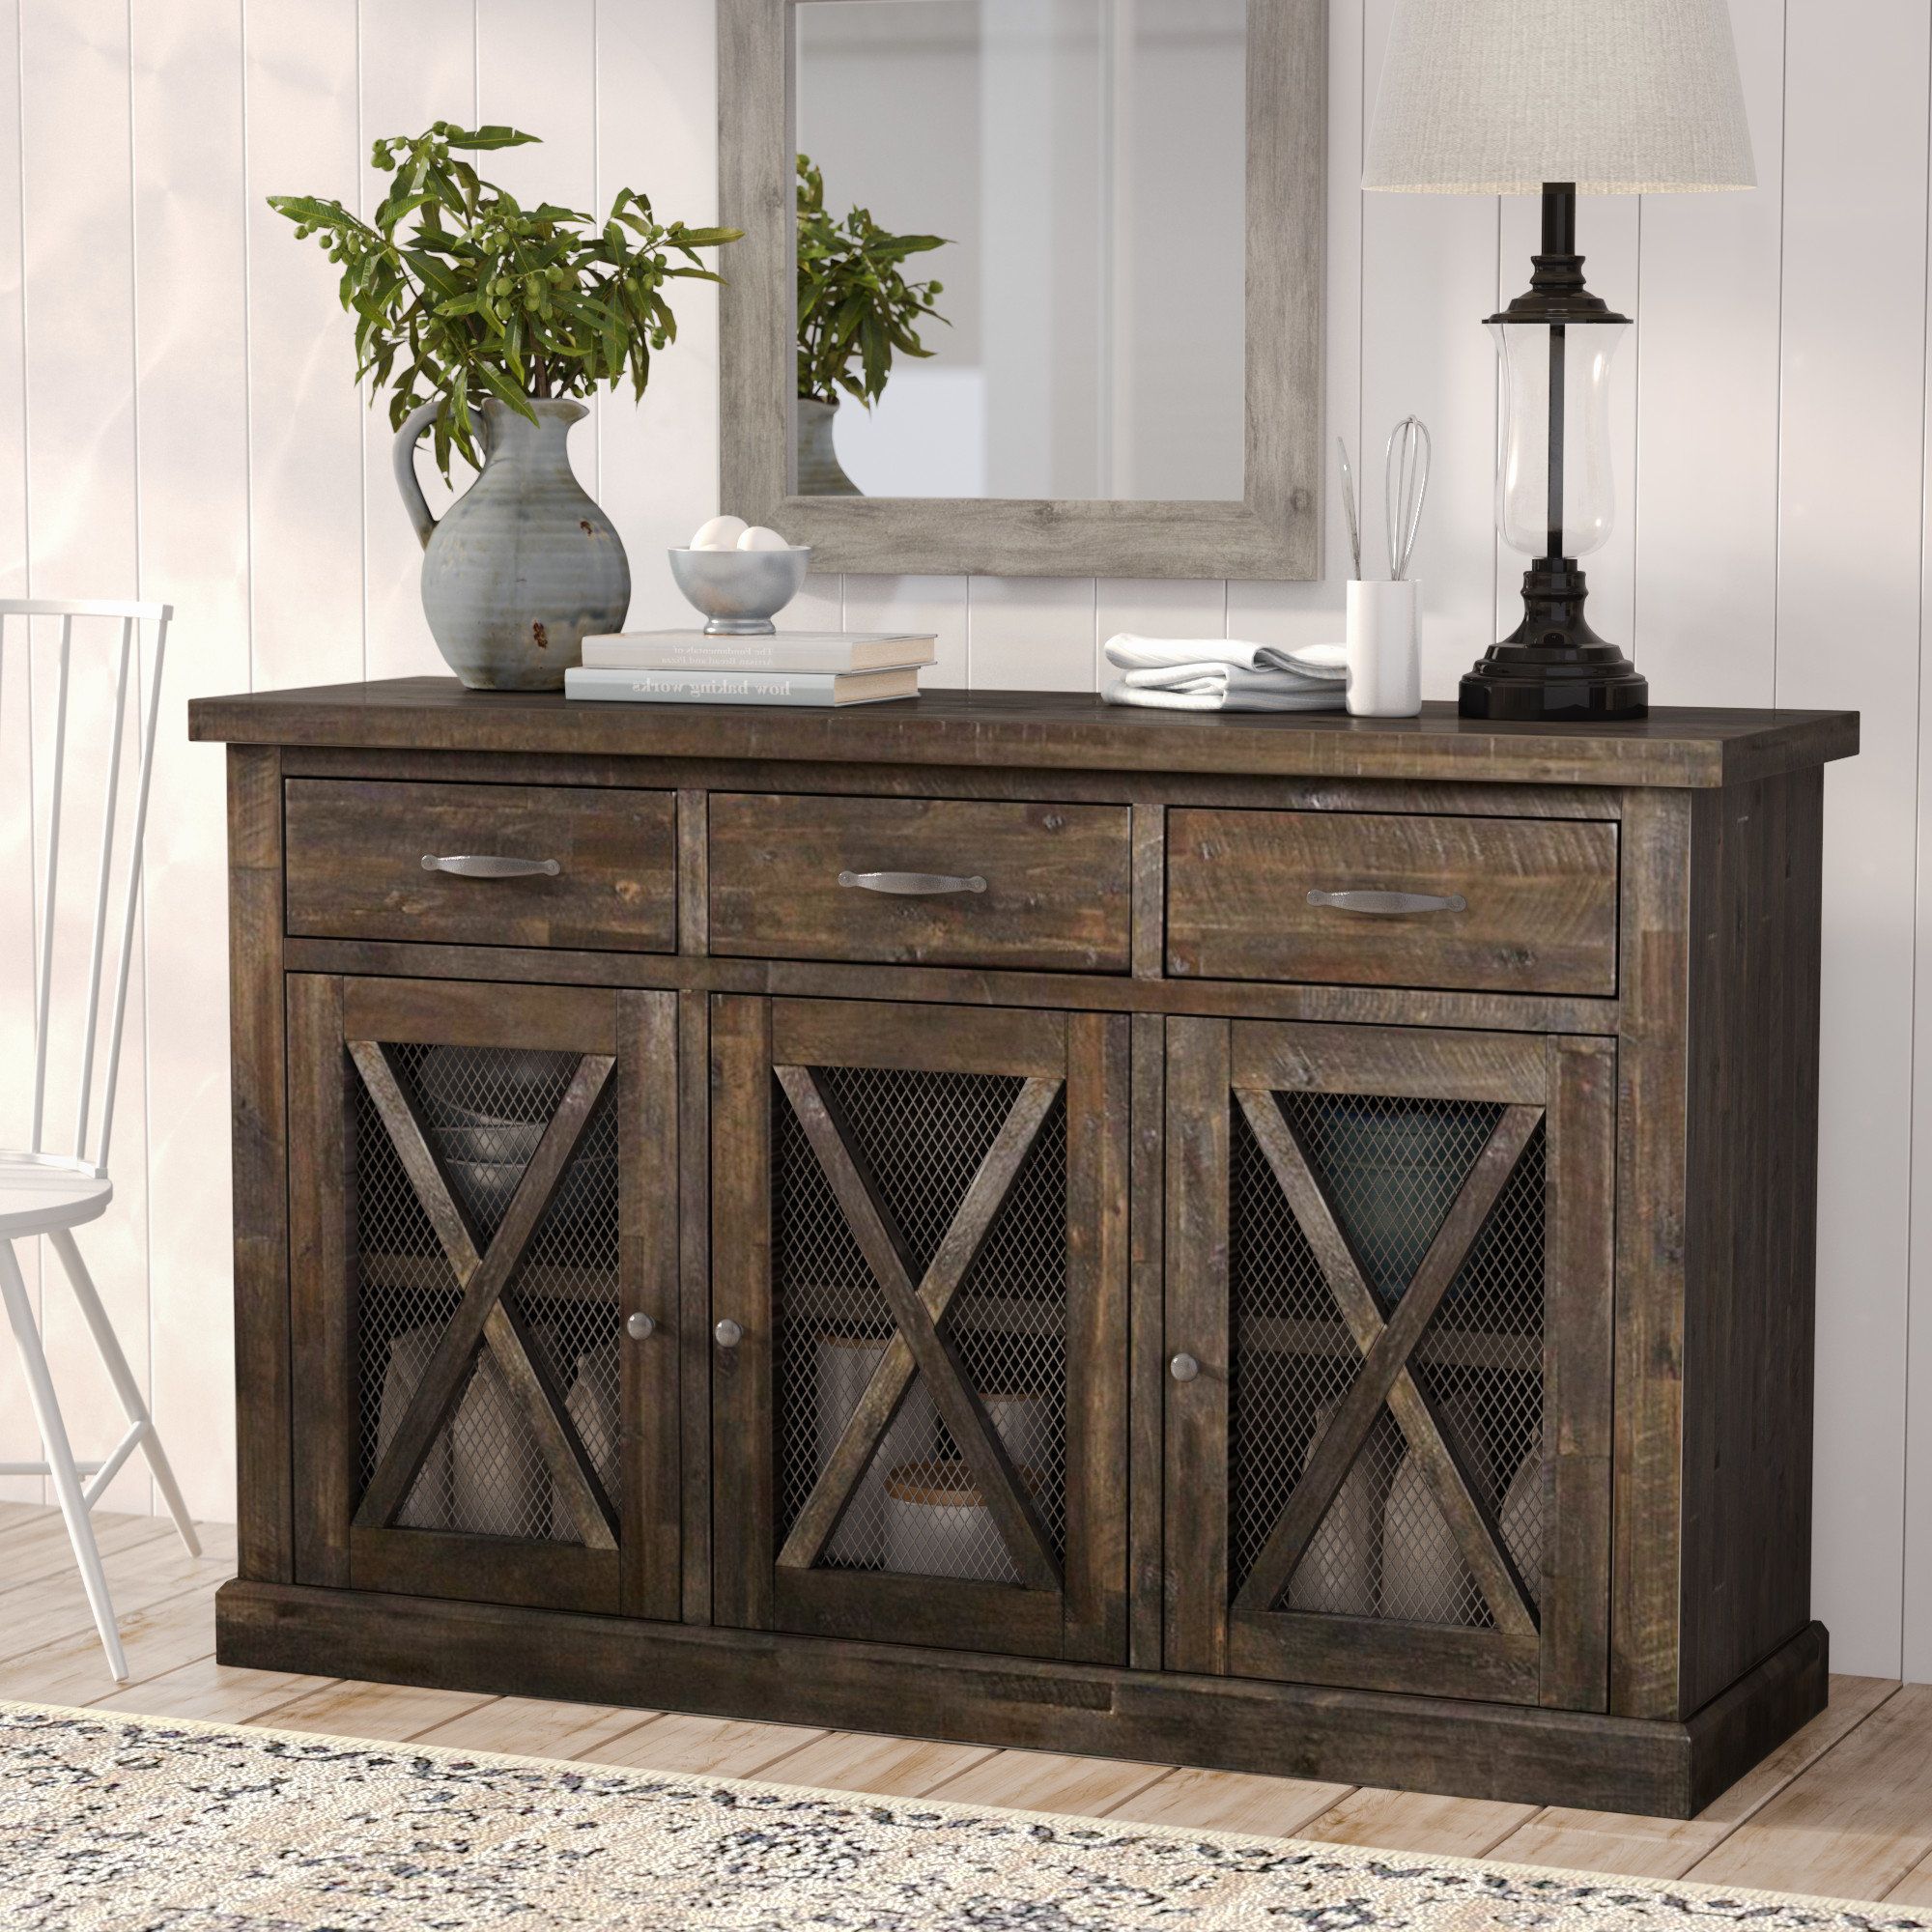 Weathered Grey Buffet | Wayfair With Regard To Contemporary Distressed Grey Buffets (Gallery 15 of 20)